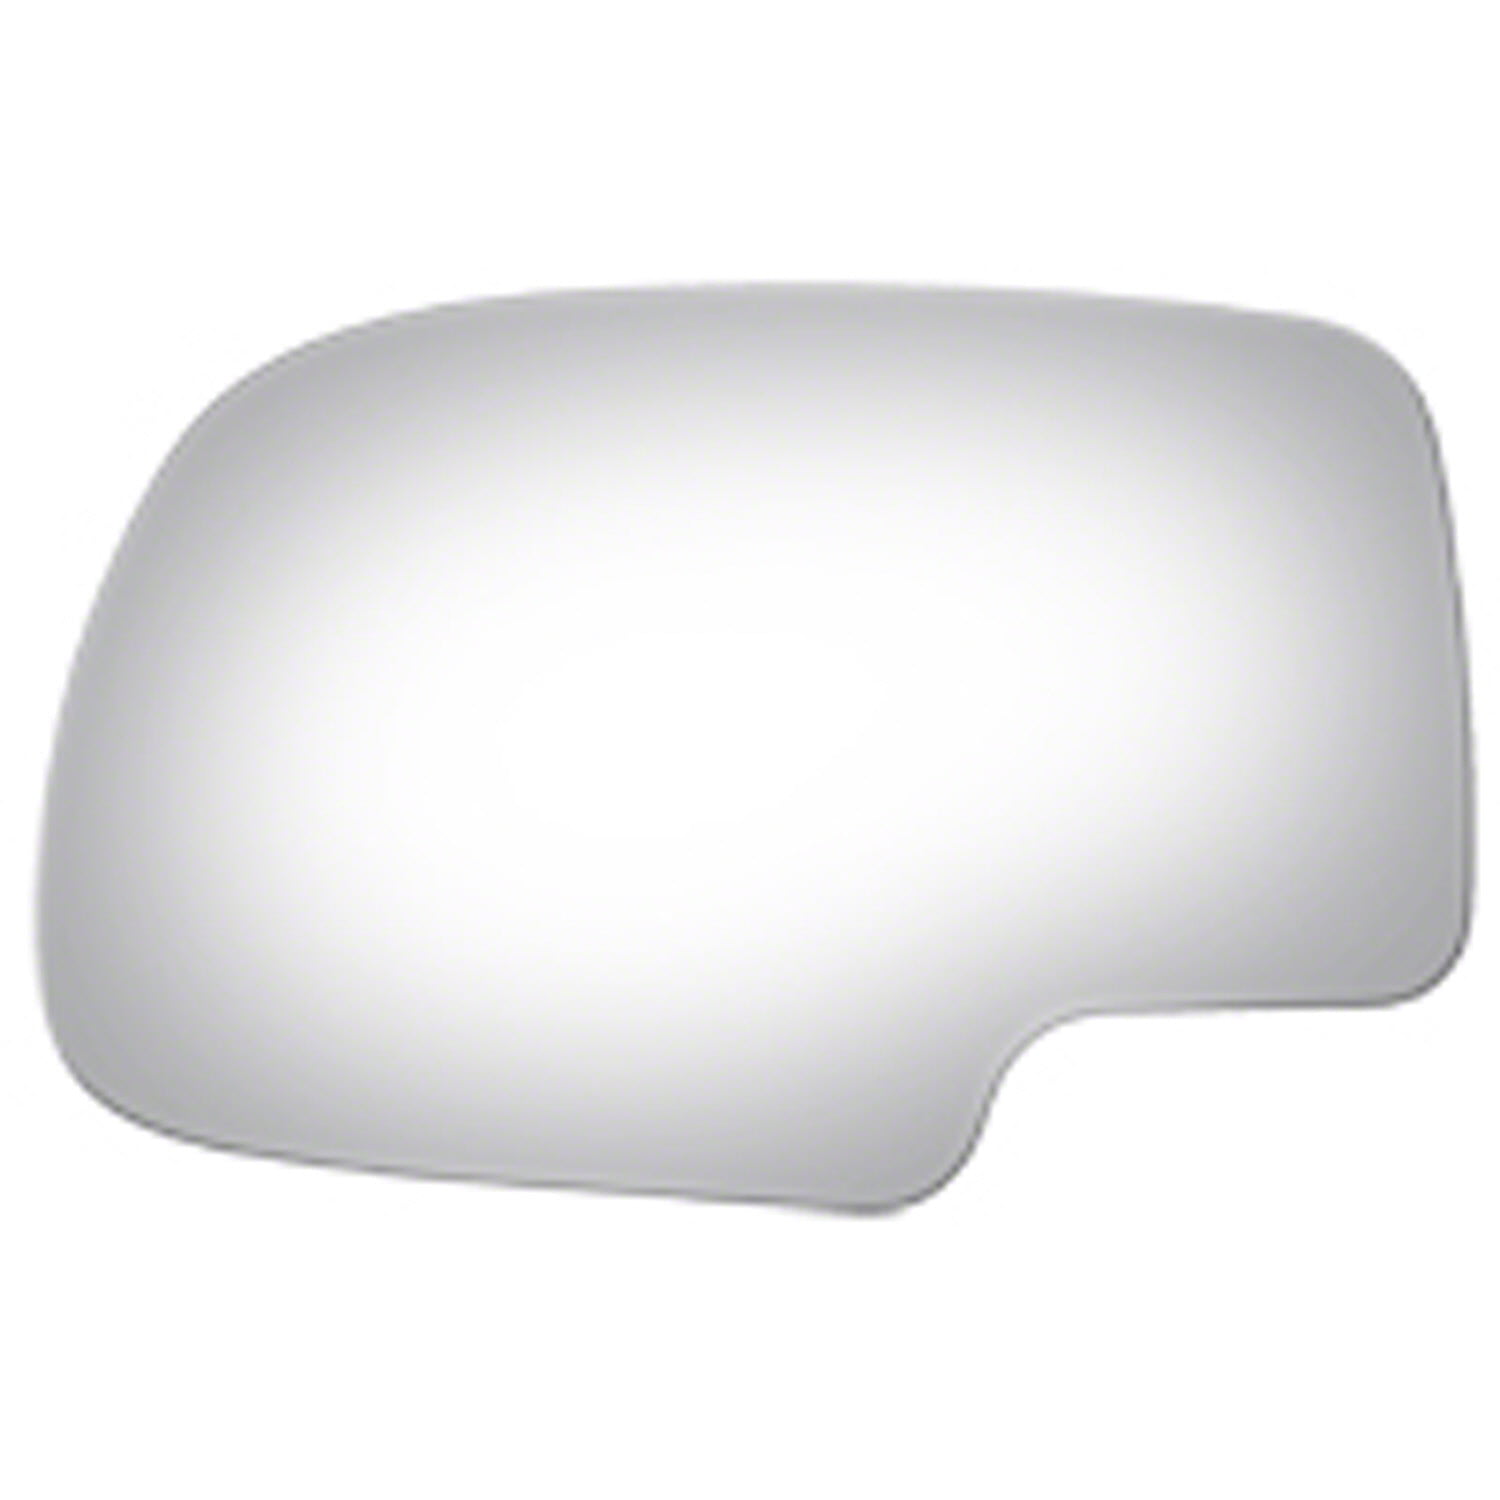 Aftermarket 2002-2006 Chevrolet Avalanche 1500 Driver Side Door Mirror Glass 5 15/16 9 7/16 x 10 2002 Chevy Avalanche Driver Side Mirror Glass